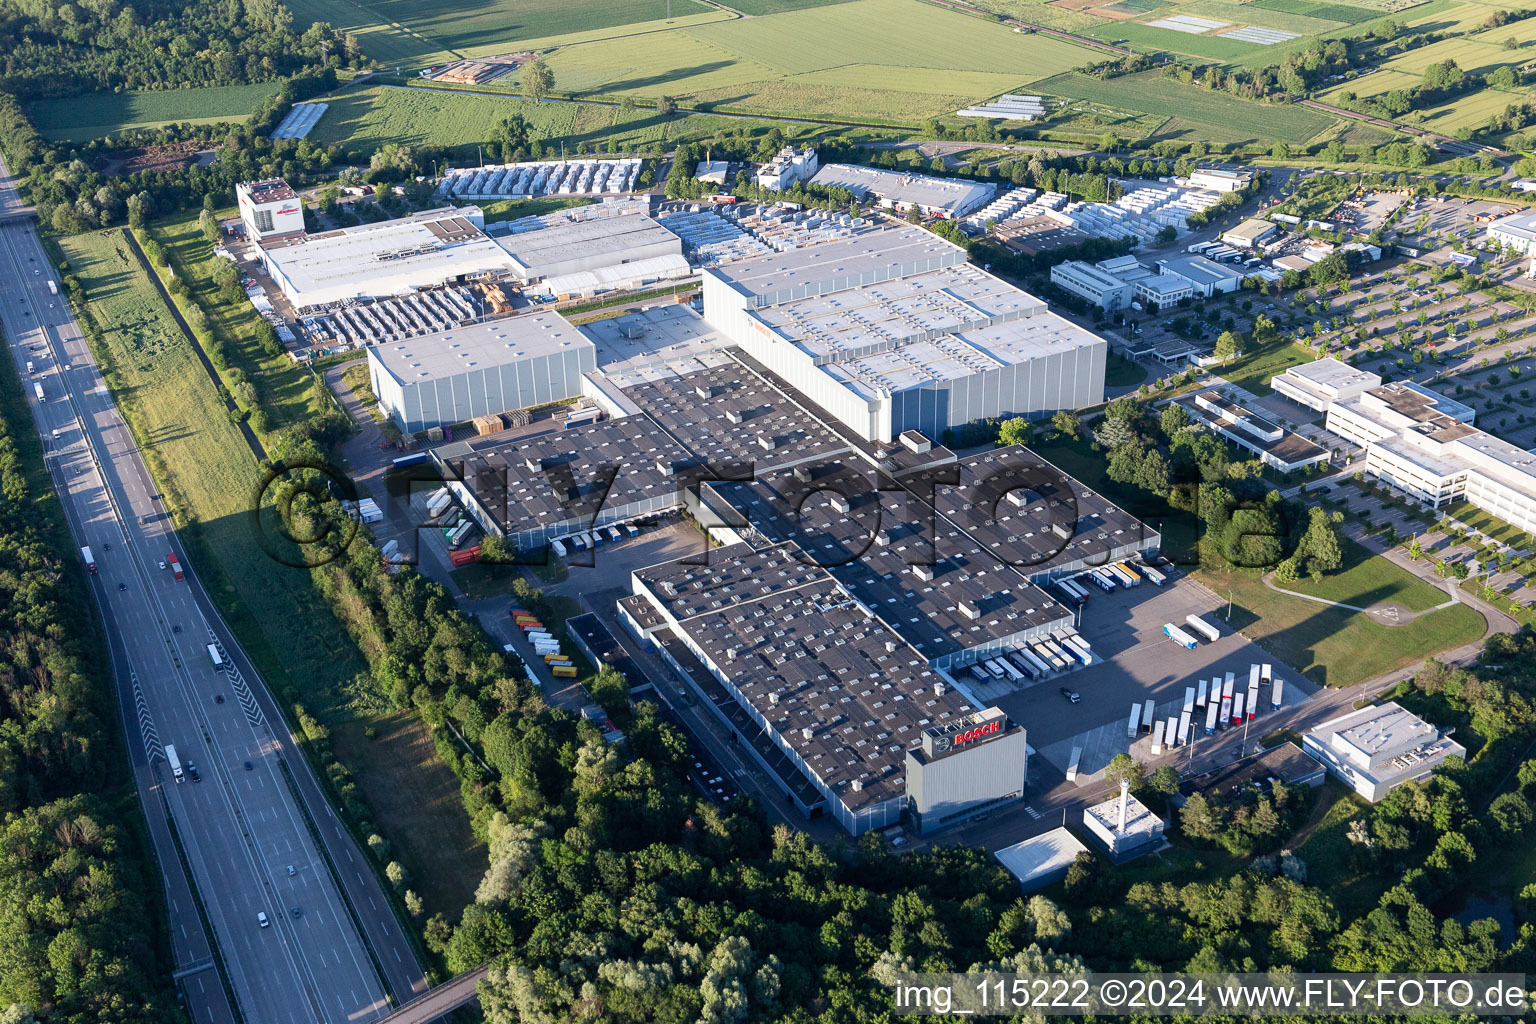 Buildings and production halls on the vehicle construction site Robert Bosch GmbH Auf of Breit in the district Durlach in Karlsruhe in the state Baden-Wurttemberg, Germany